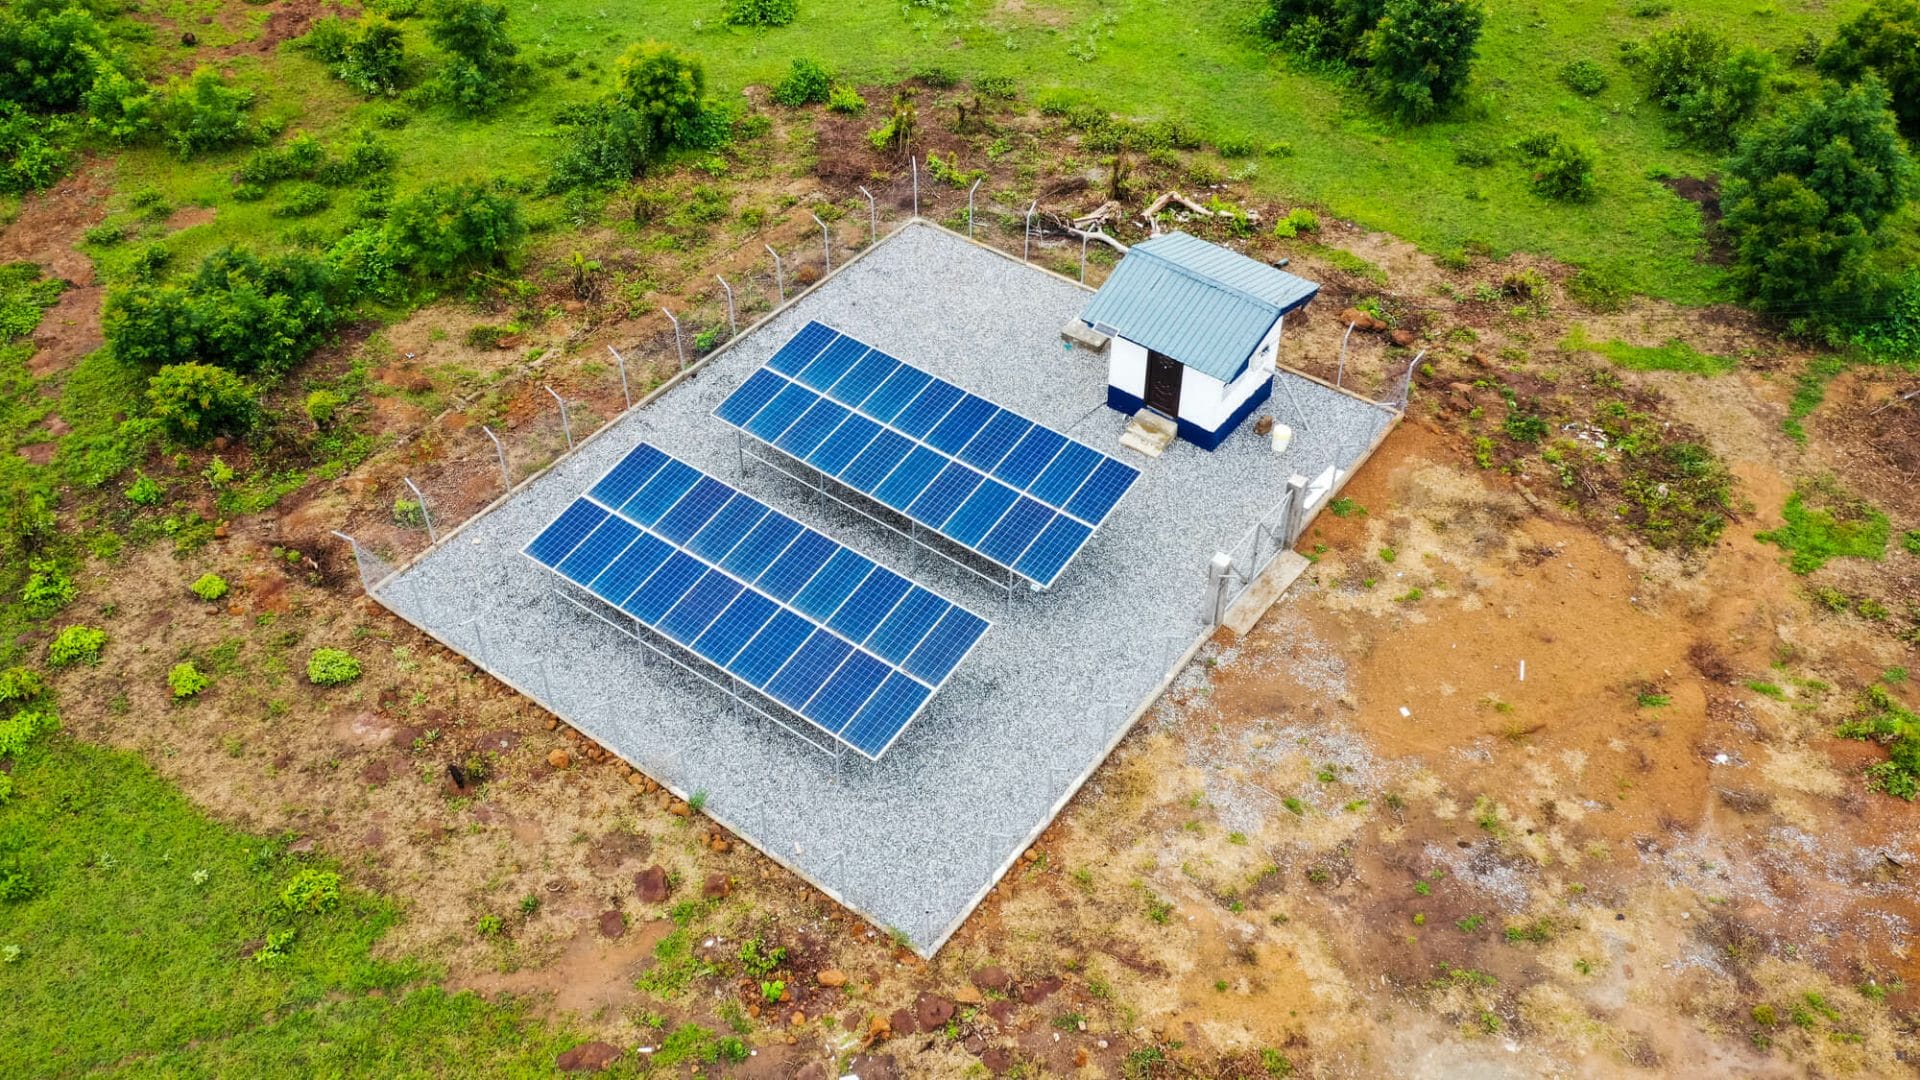 Aerial view of a pump house powered by solar energy for small town water system